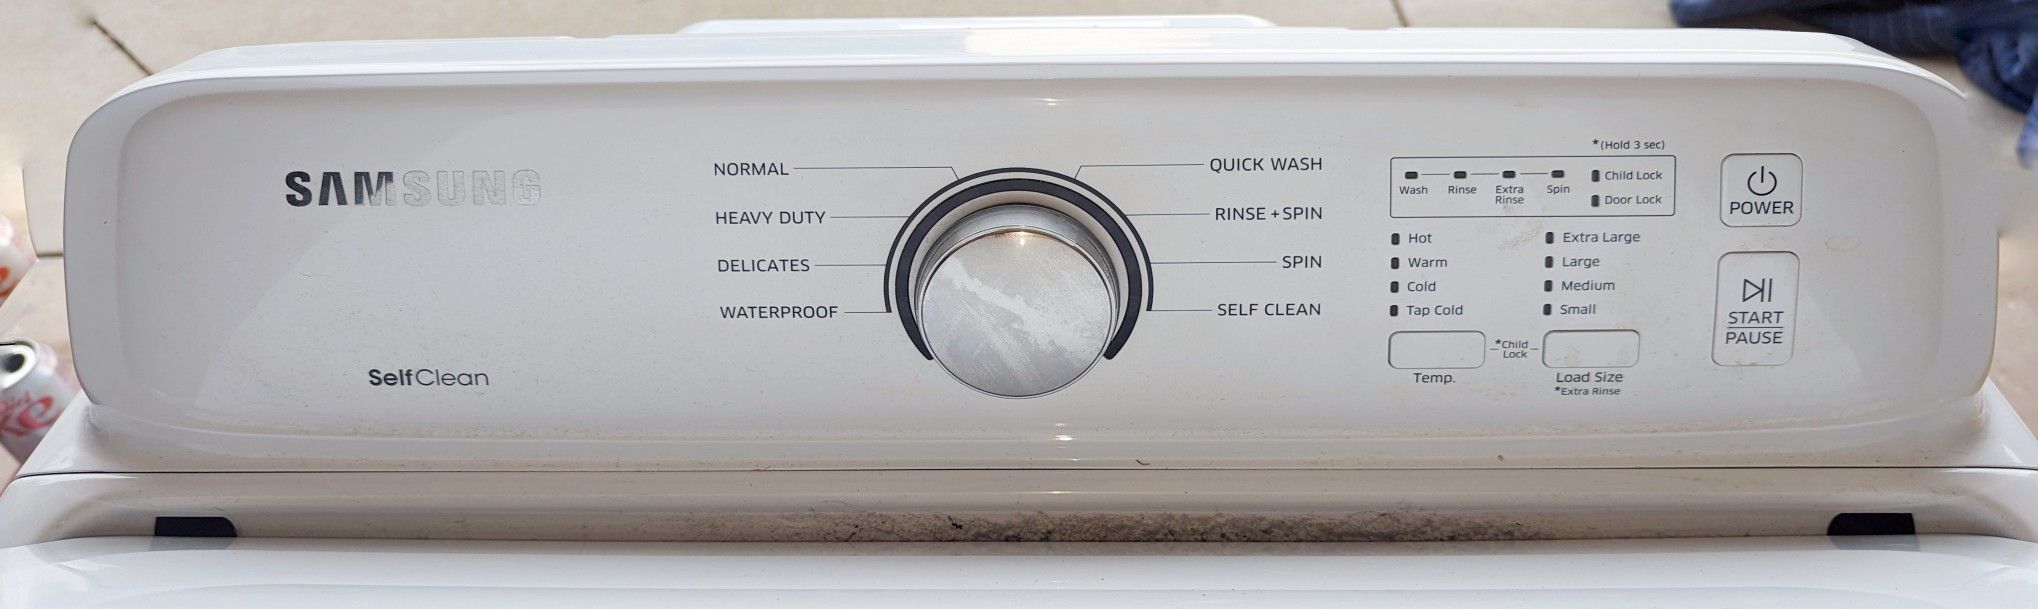 Samsung 4 Cubic foot Washer